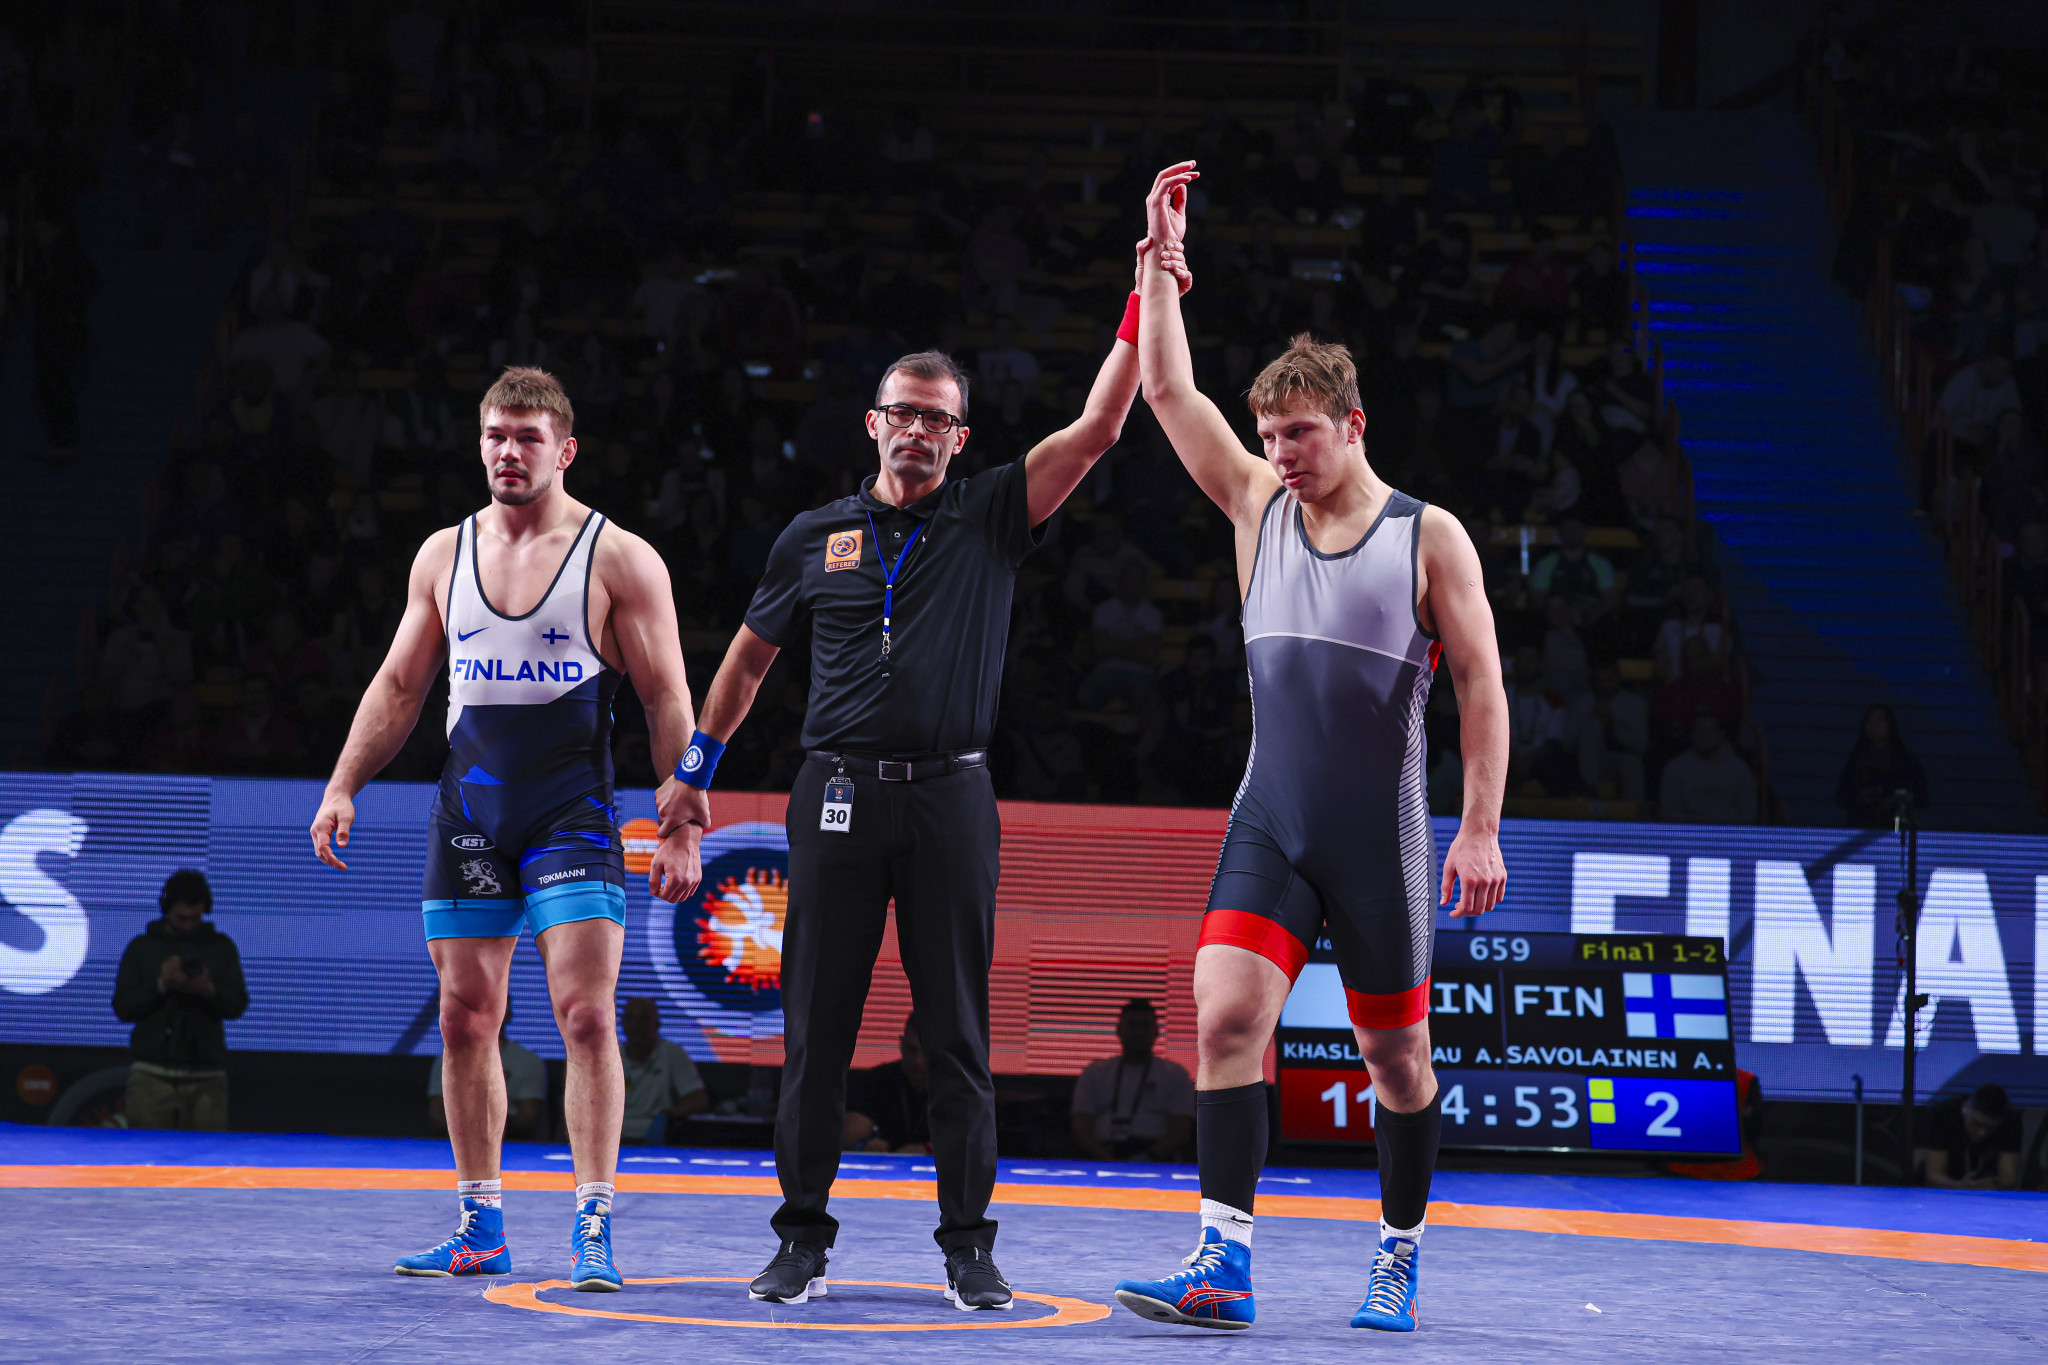 Khaslakhanau (right) after defeating Savolainen in the men's Greco-Roman 97 kg category. UWW 